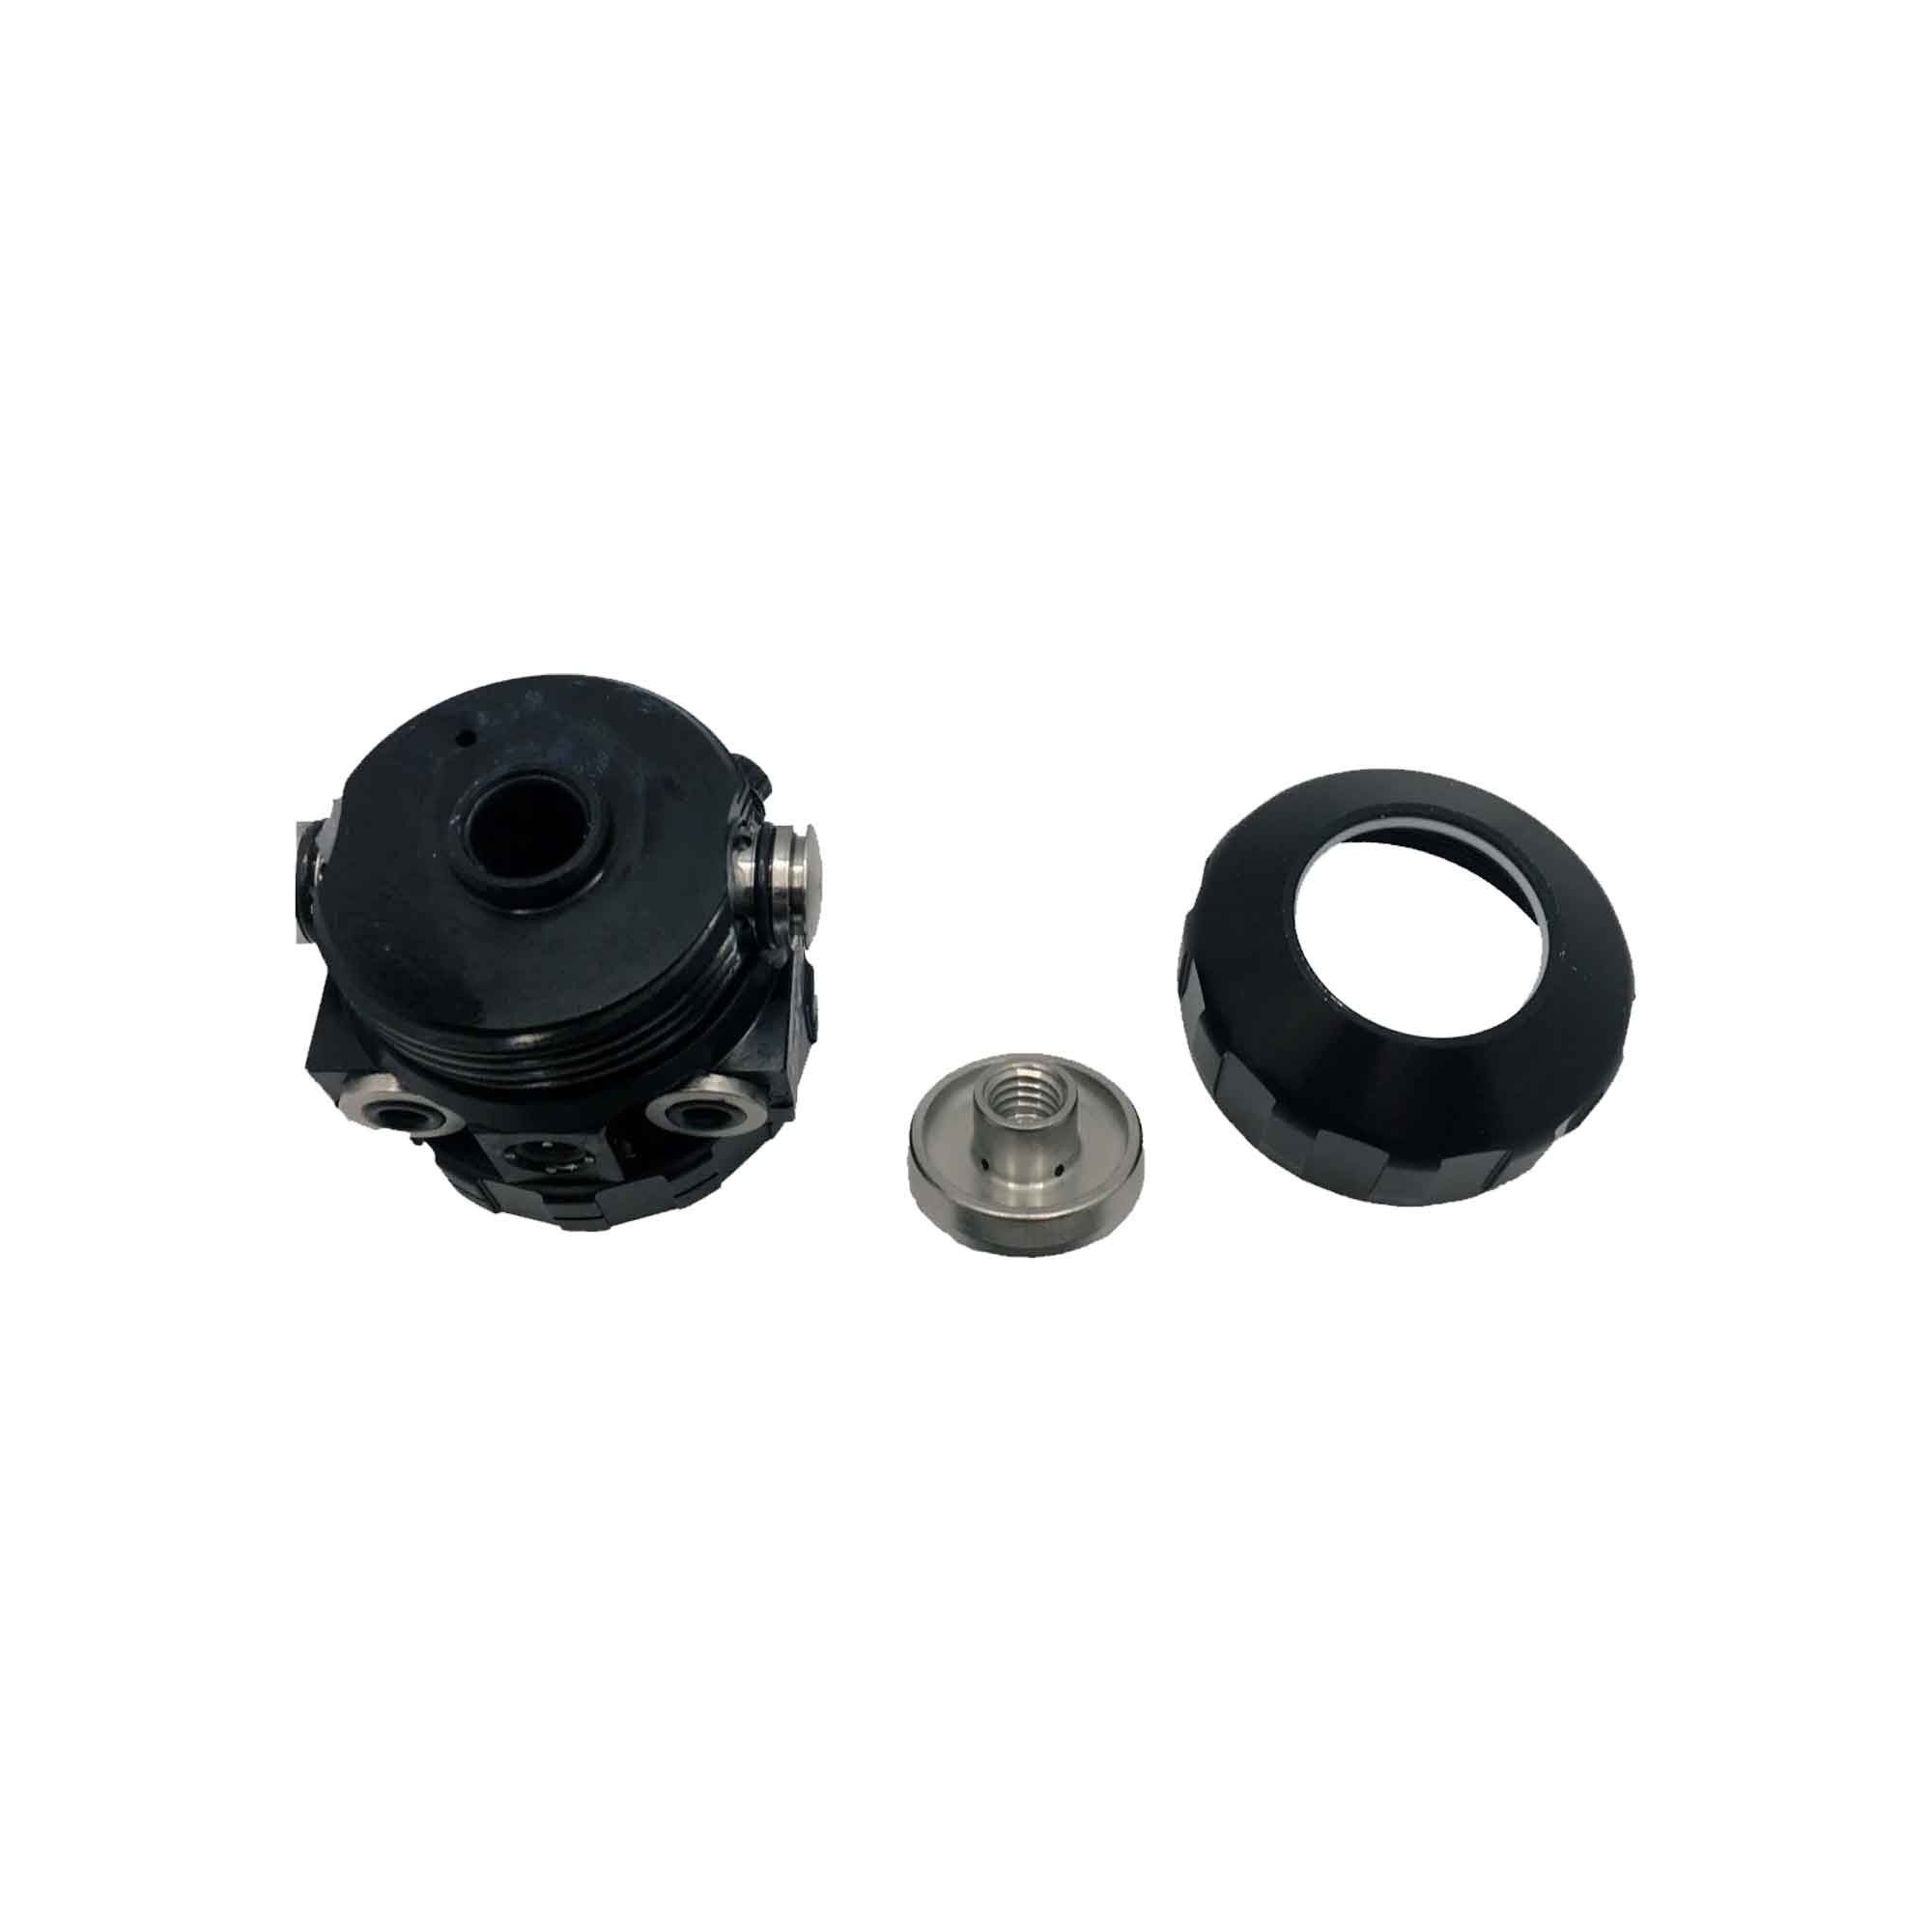 246361 - Front End Assembly Kit - PURspray